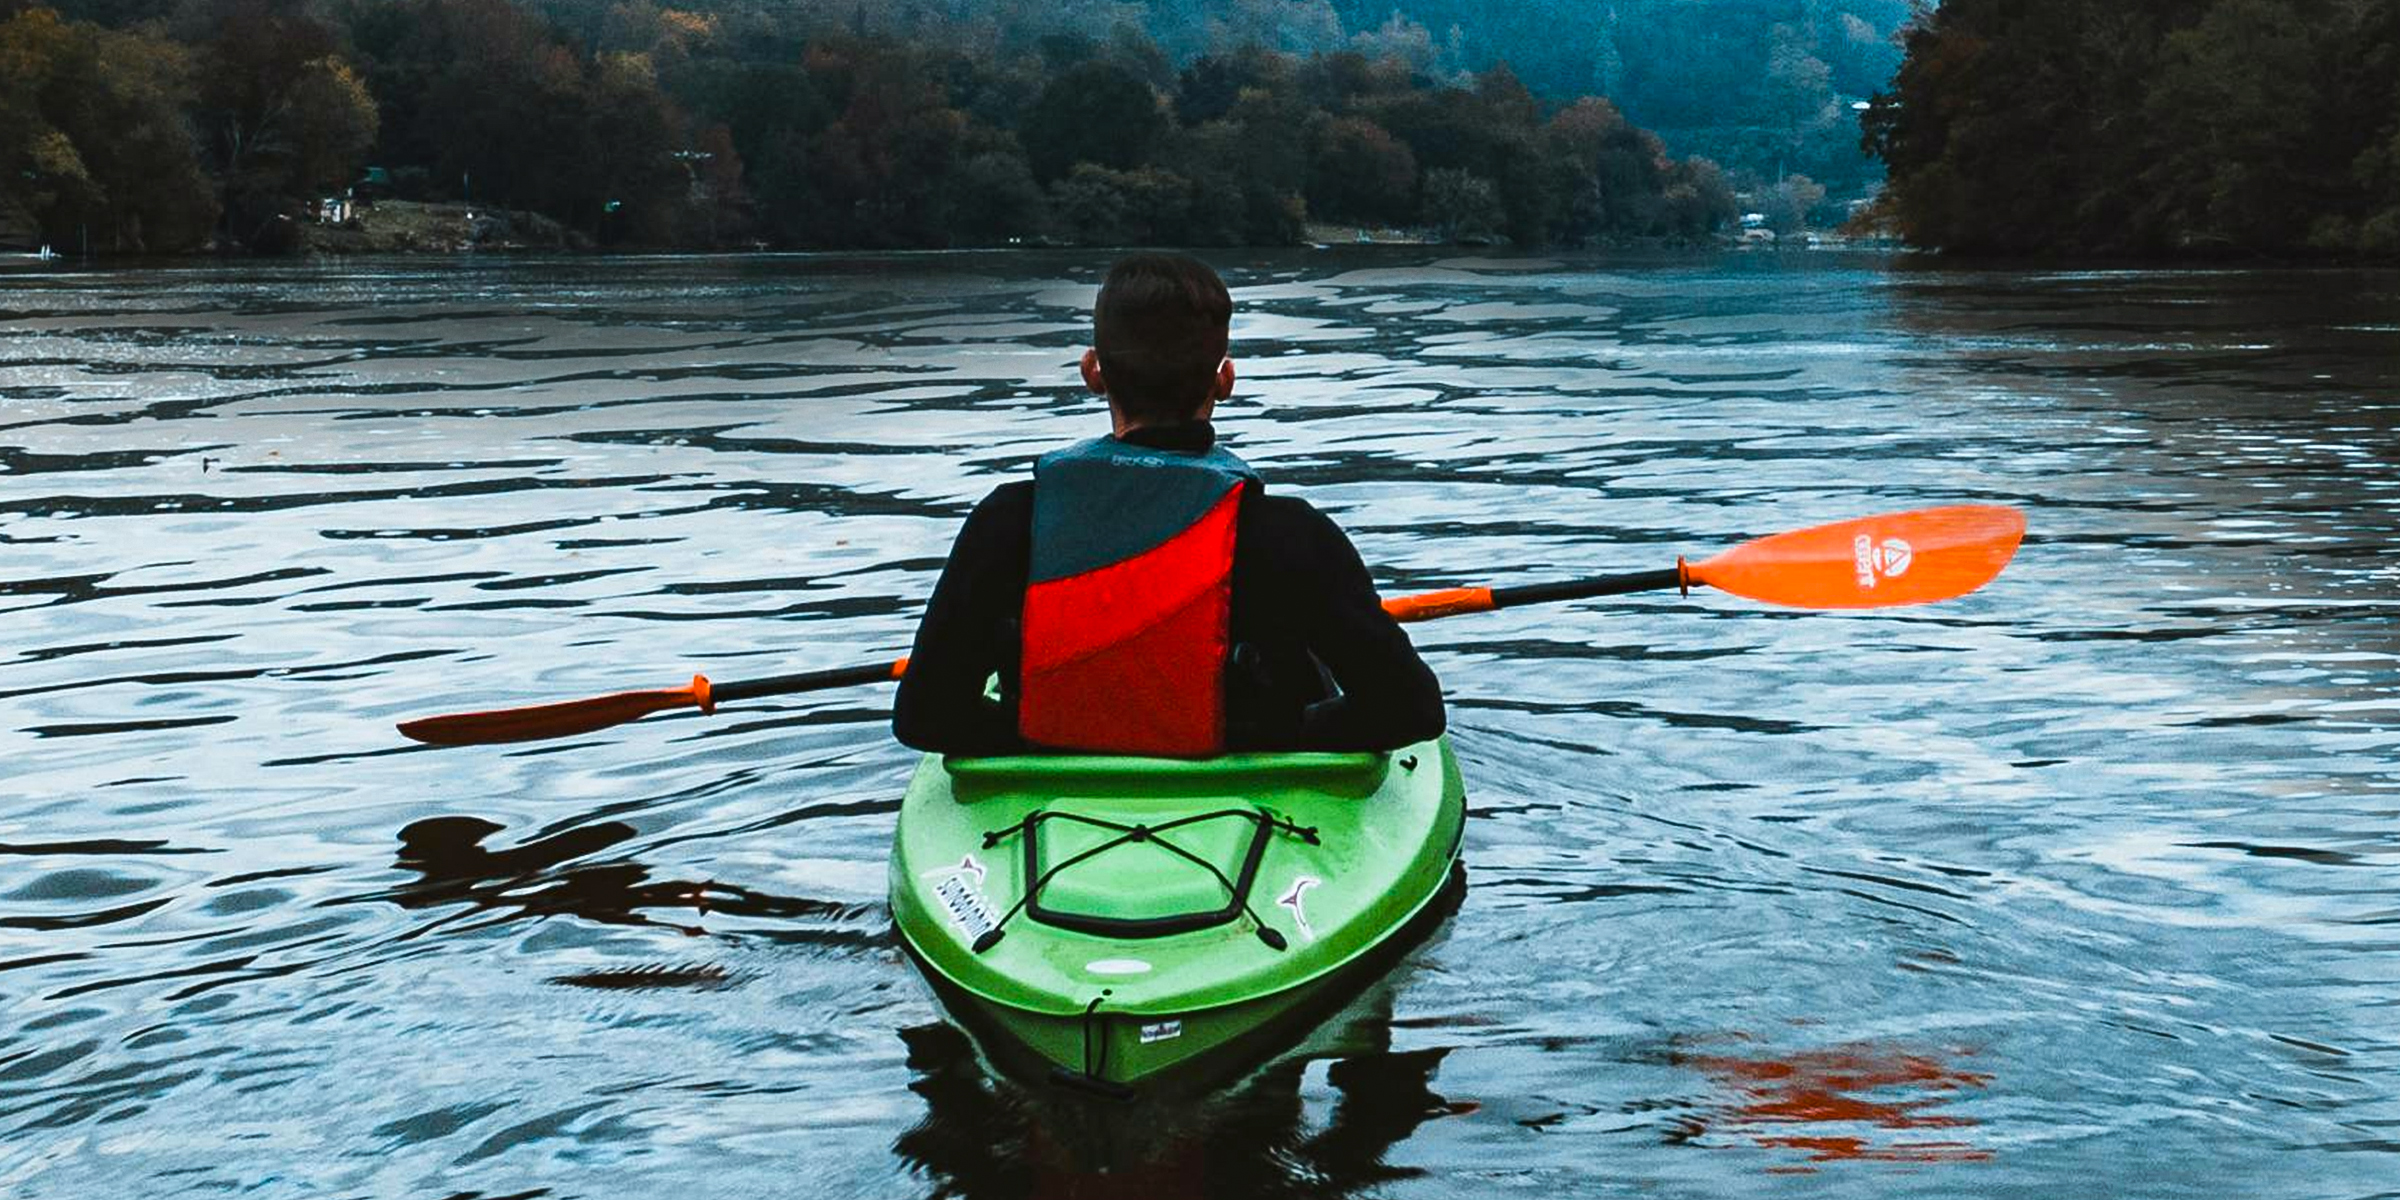 A person kayaking | Source: Pexels/Kelly